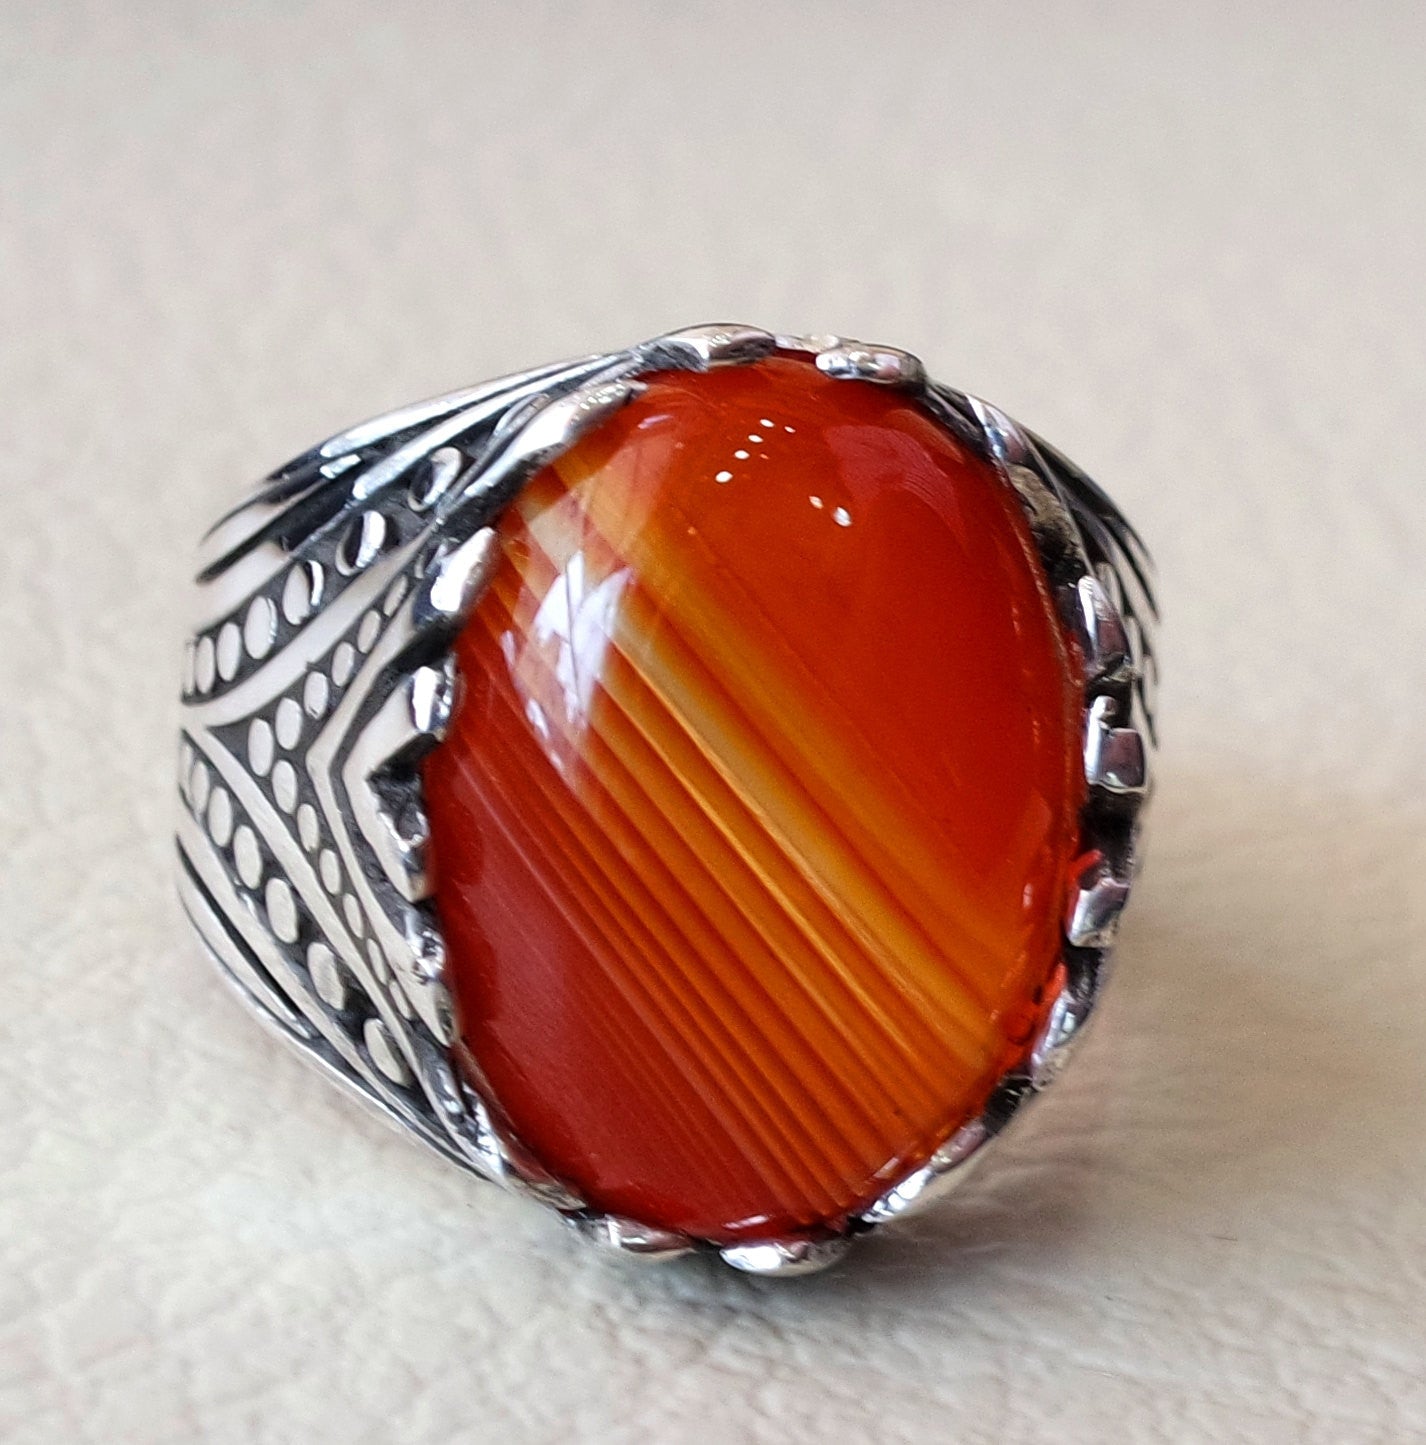 striped agate aqeeq stone red carnelian semi precious men ring all sizes antique ottoman middle eastern jewelry oval cabochon fast shipping